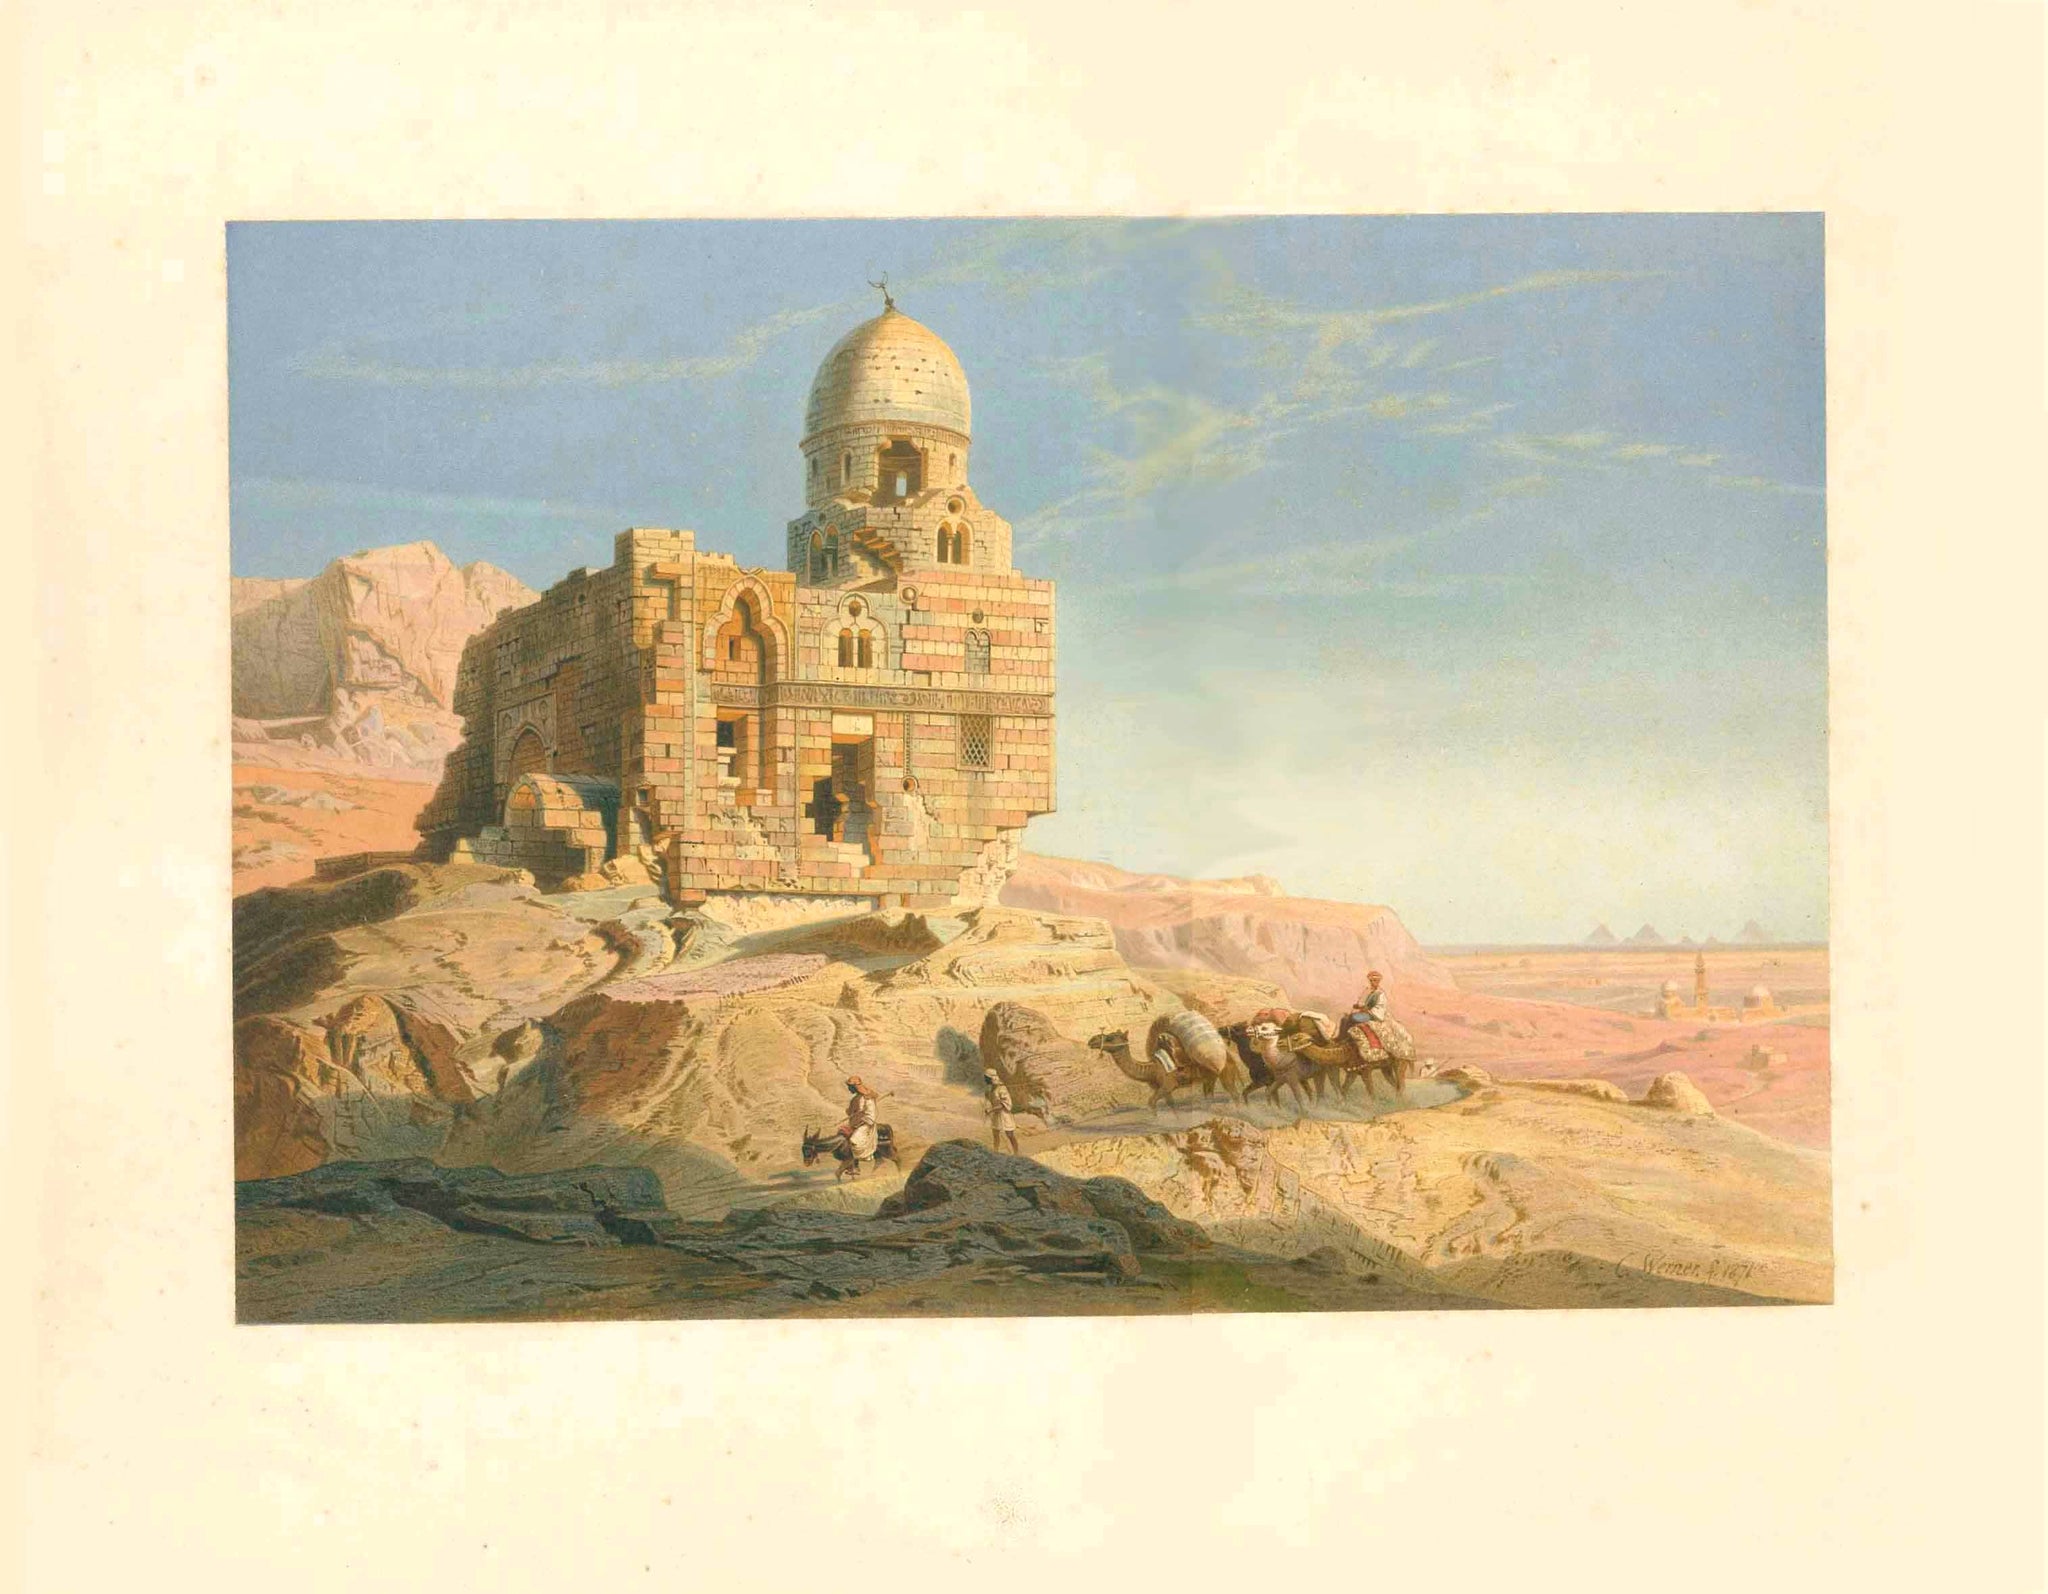 Cairo. - "Die Chalifengraeber von Cairo"  Chromo lithograph after the painting by Carl Werner (1808-1894)  Published in: "Nilbilder" Views along the river Nile  Published by Artistische Anstalt Gustav W. Seitz  Wandsbeck bei Hamburg, 1871, interior design, wall decoration, ideas, idea, gift ideas, present, vintage, charming, special, decoration, home interior, living room design